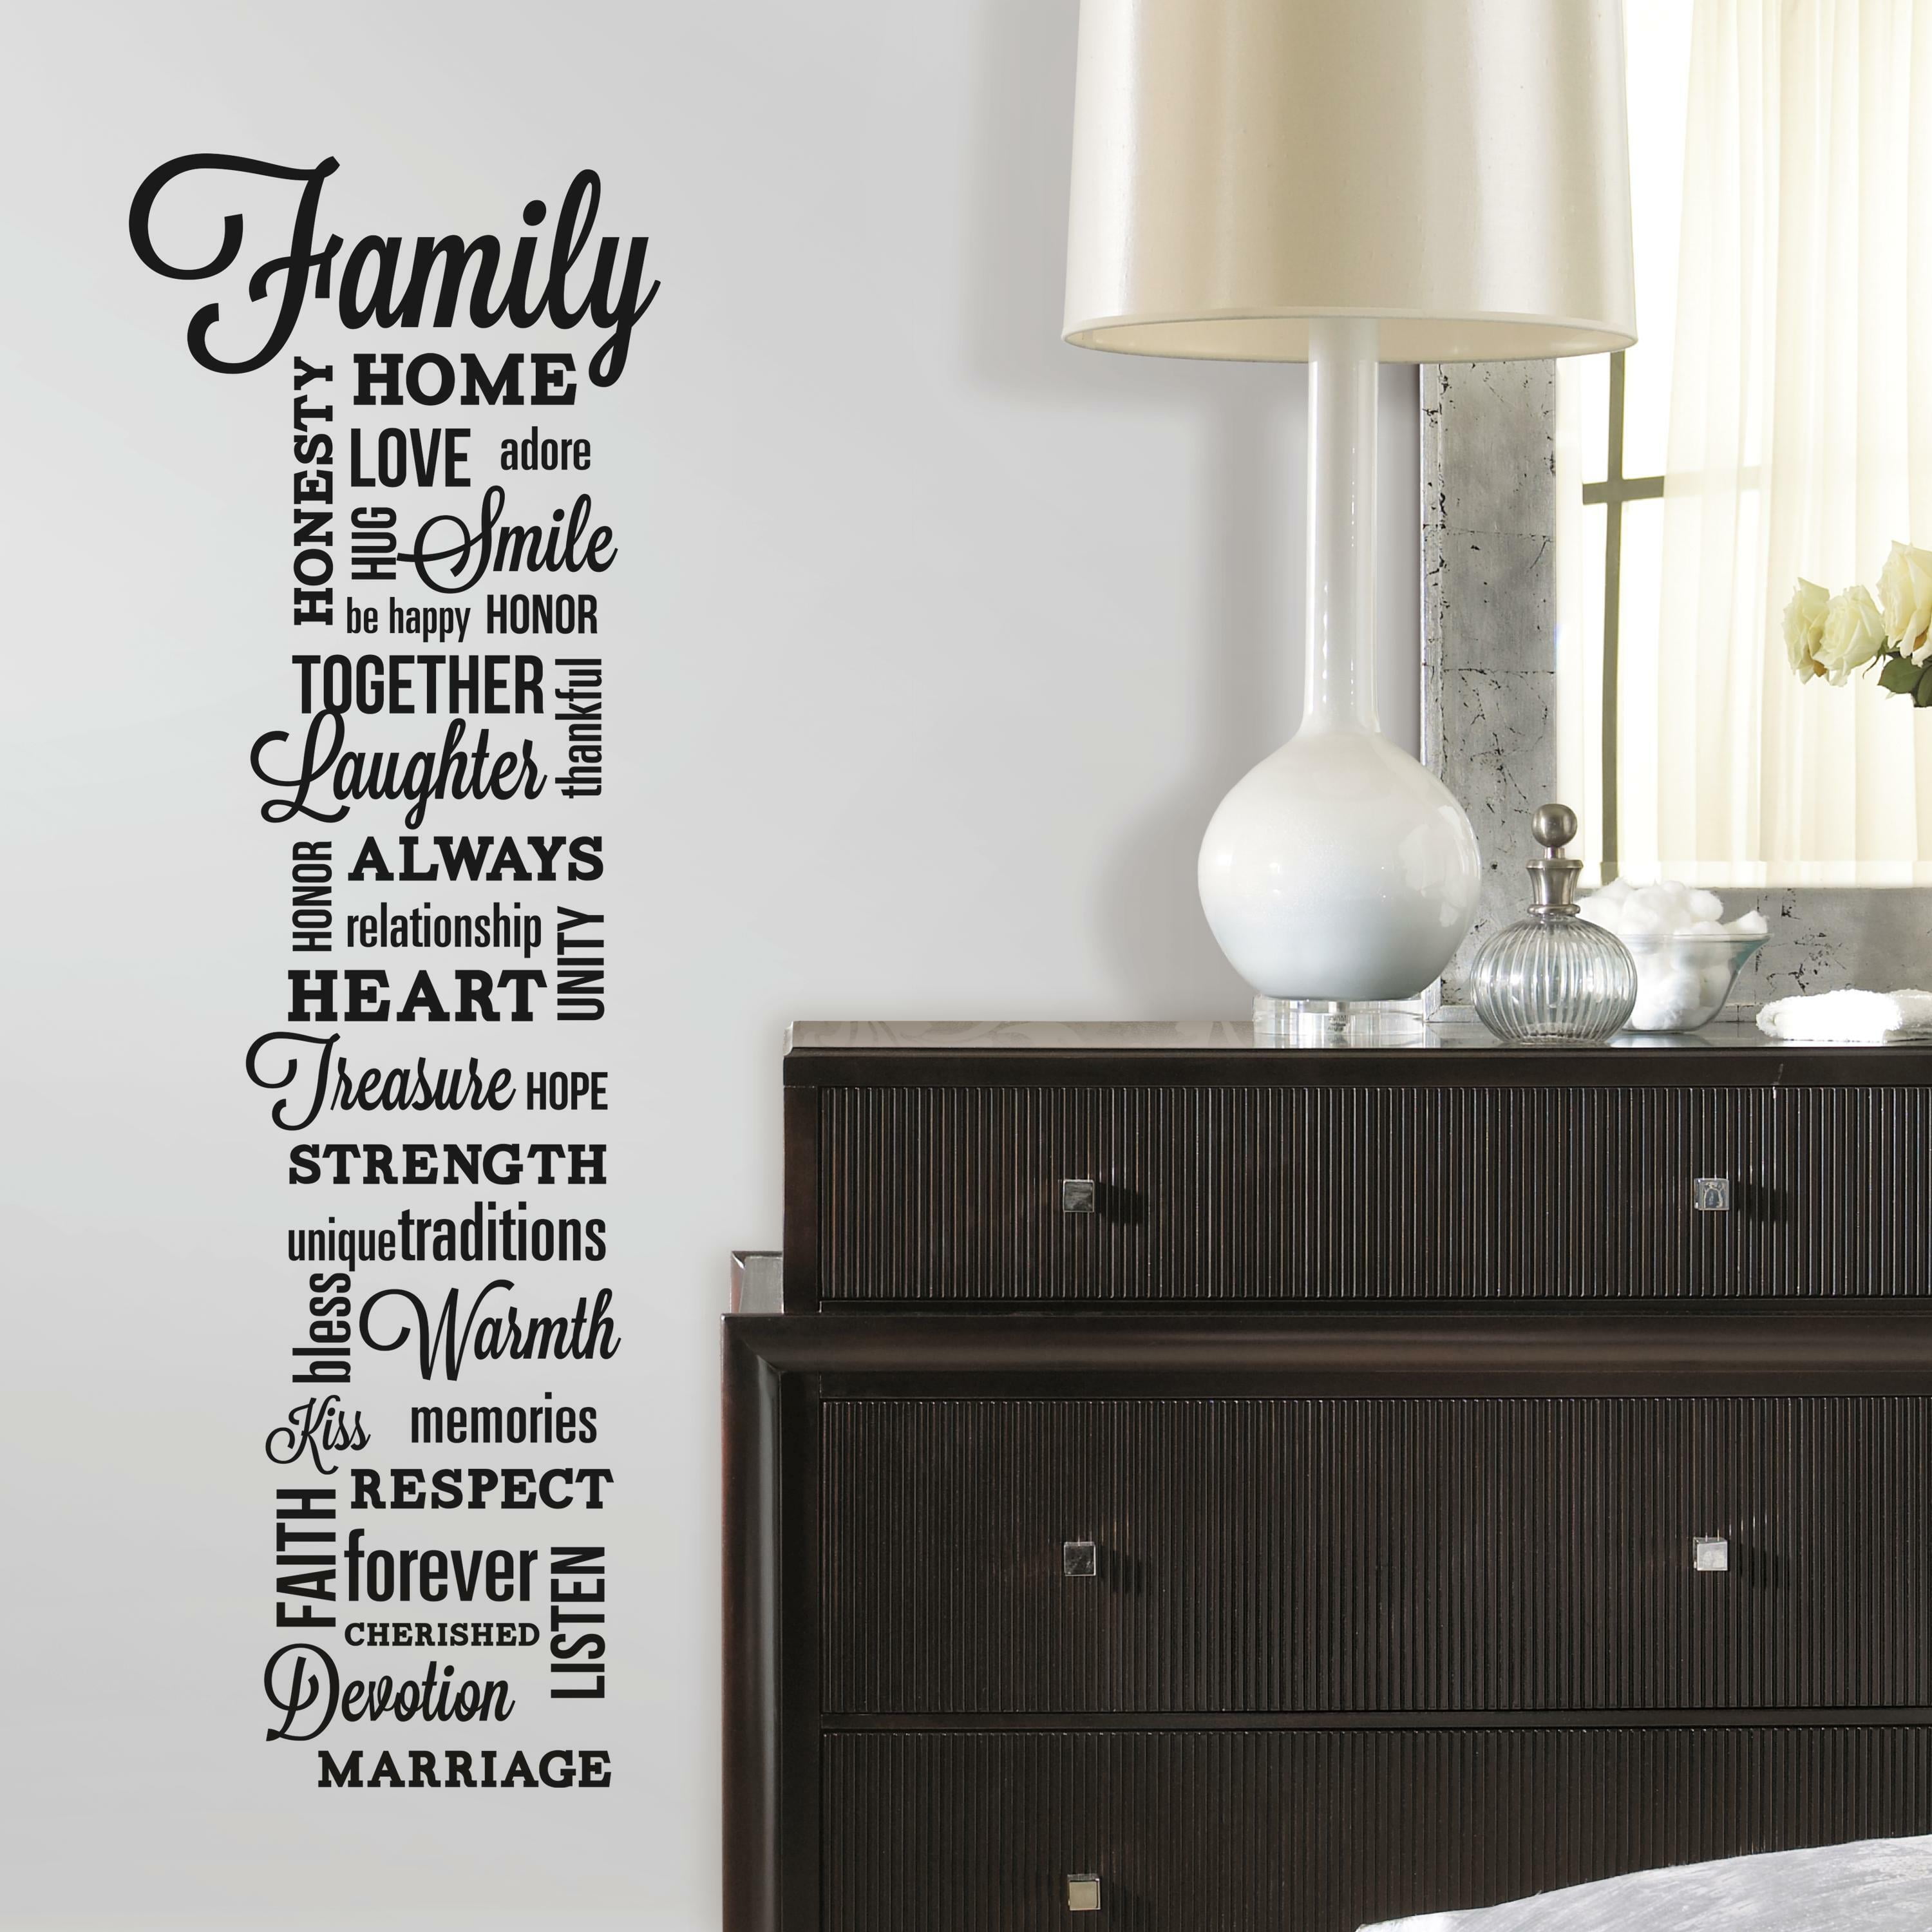 TIME SPENT WITH FAMILY Quote DIY Art Vinyl Wall Sticker Decal Mural Decor 